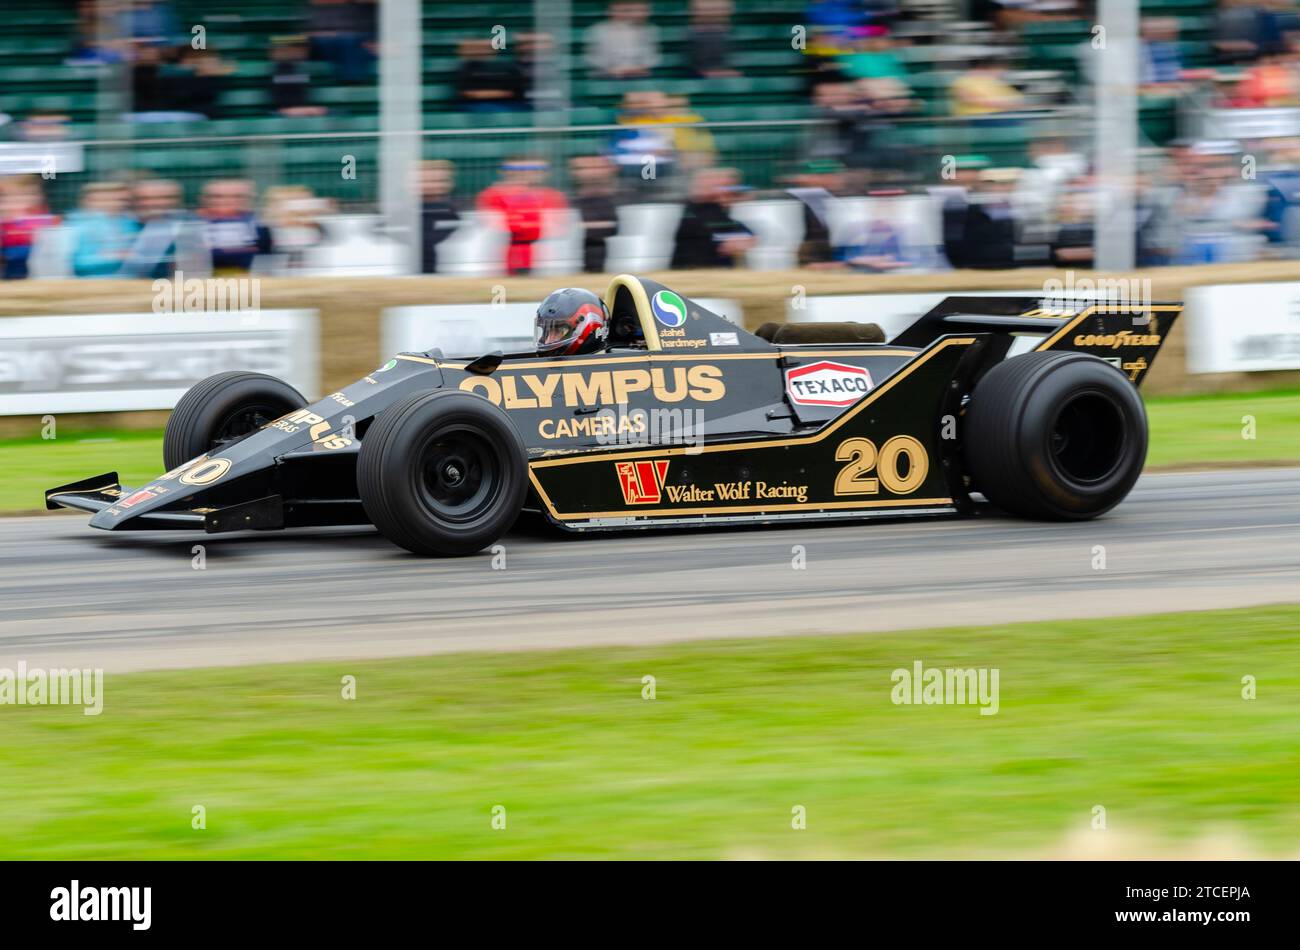 Wolf Cosworth WR7 Grand Prix, Formula 1 race car racing up the hill climb at the 2016 Goodwood Festival of Speed. 1979 James Hunt car Stock Photo